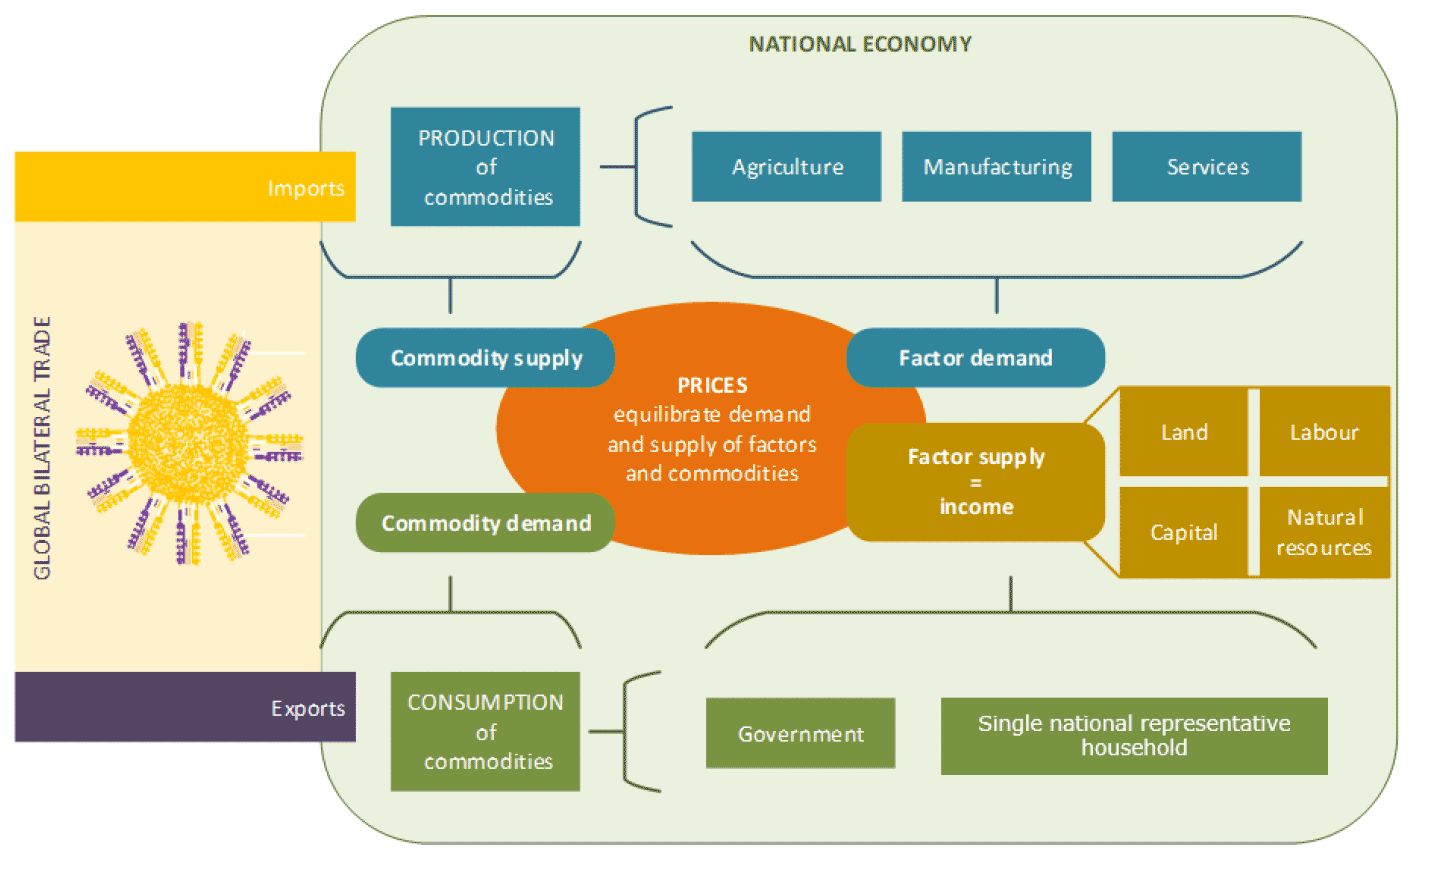 A diagram of the MAGNET CGE Model. The model shows a national economy and Global Bilateral Trade. The Global Bilateral Trade is made up of exports from the national economy and imports into the national economy. Within the National Economy, the government and a single representative national household feed into the consumption of commodities. Together the consumption of commodities within the national economy and exports lead to Commodity demand. Factor Supply which equals income is made up of Land, Labour, Capital, and Natural Resources together with the Government and the single representative household feeding into this. Factor demand is created by Agriculture, Manufacturing and Services. Agriculture, Manufacturing, and services lead to the production of commodities, which together with imports make up the commodity supply. Prices equilibrate demand and supply of factors and commodities.